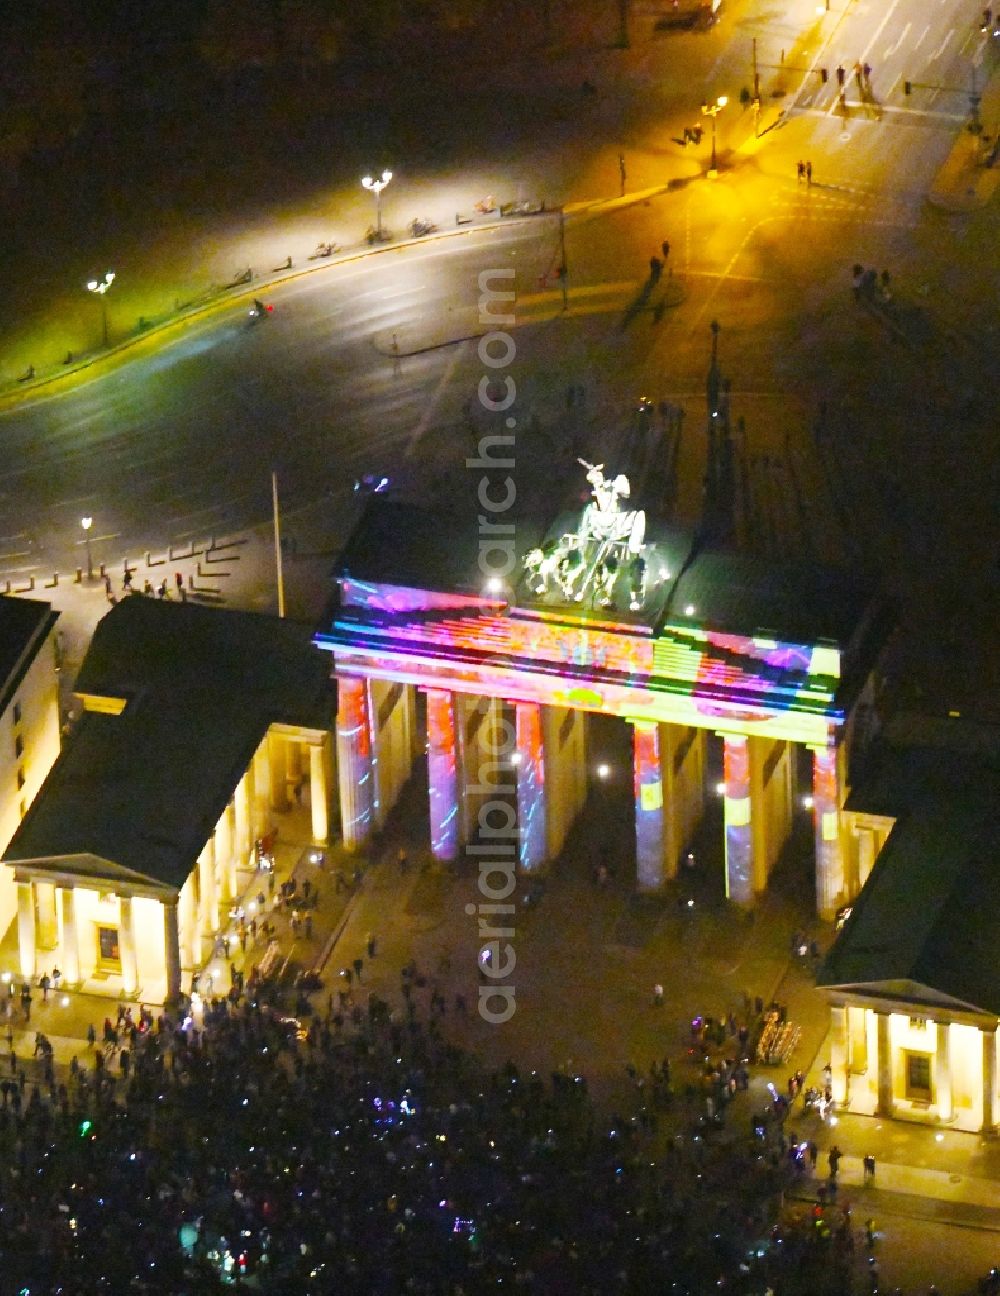 Berlin at night from the bird perspective: Night lighting Tourist attraction of the historic monument Brandenburger Tor on Pariser Platz - Unter den Linden in the district Mitte in Berlin, Germany